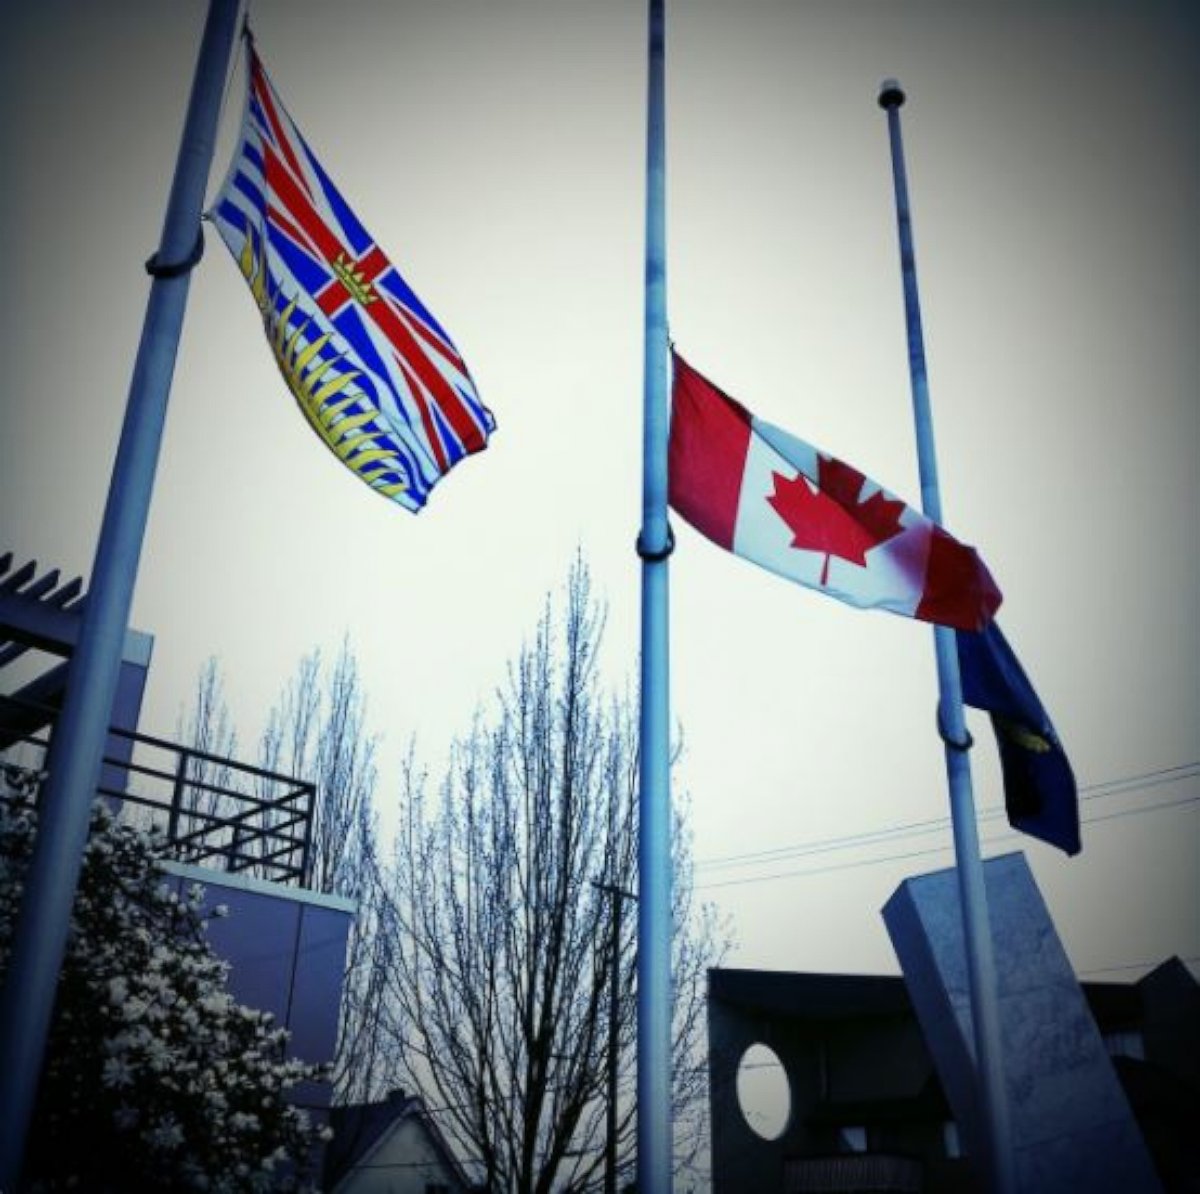 PHOTO: The Victoria Police Department in British Columbia, Canada, flew flags at half-mast on March 22, 2017, to pay tribute to the victims of the London terror attack earlier that day. 